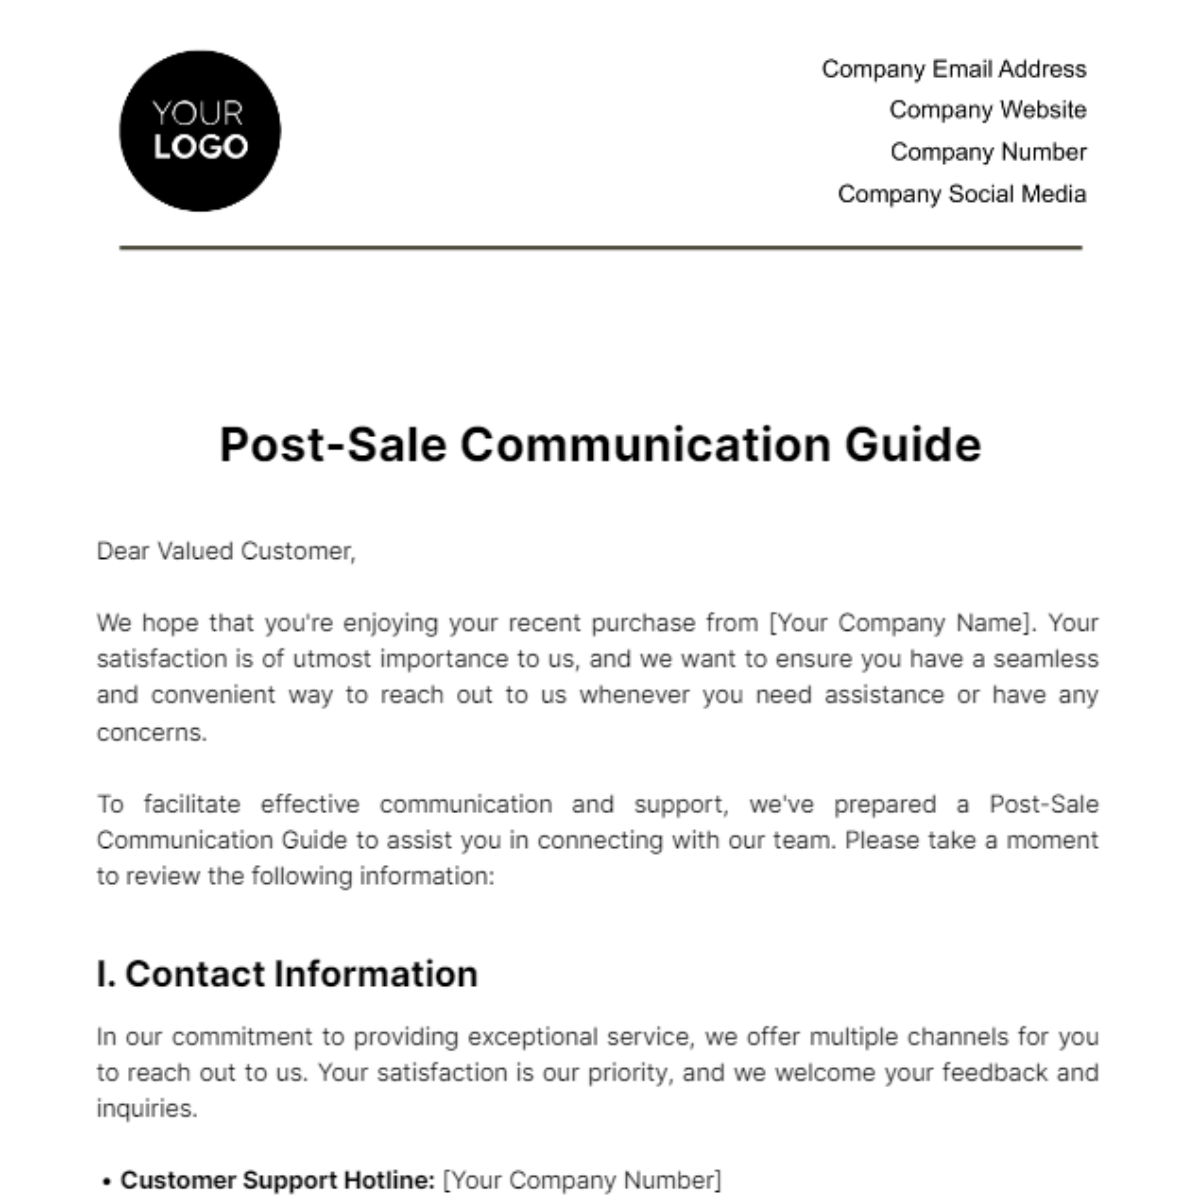 Post-Sale Communication Guide Template